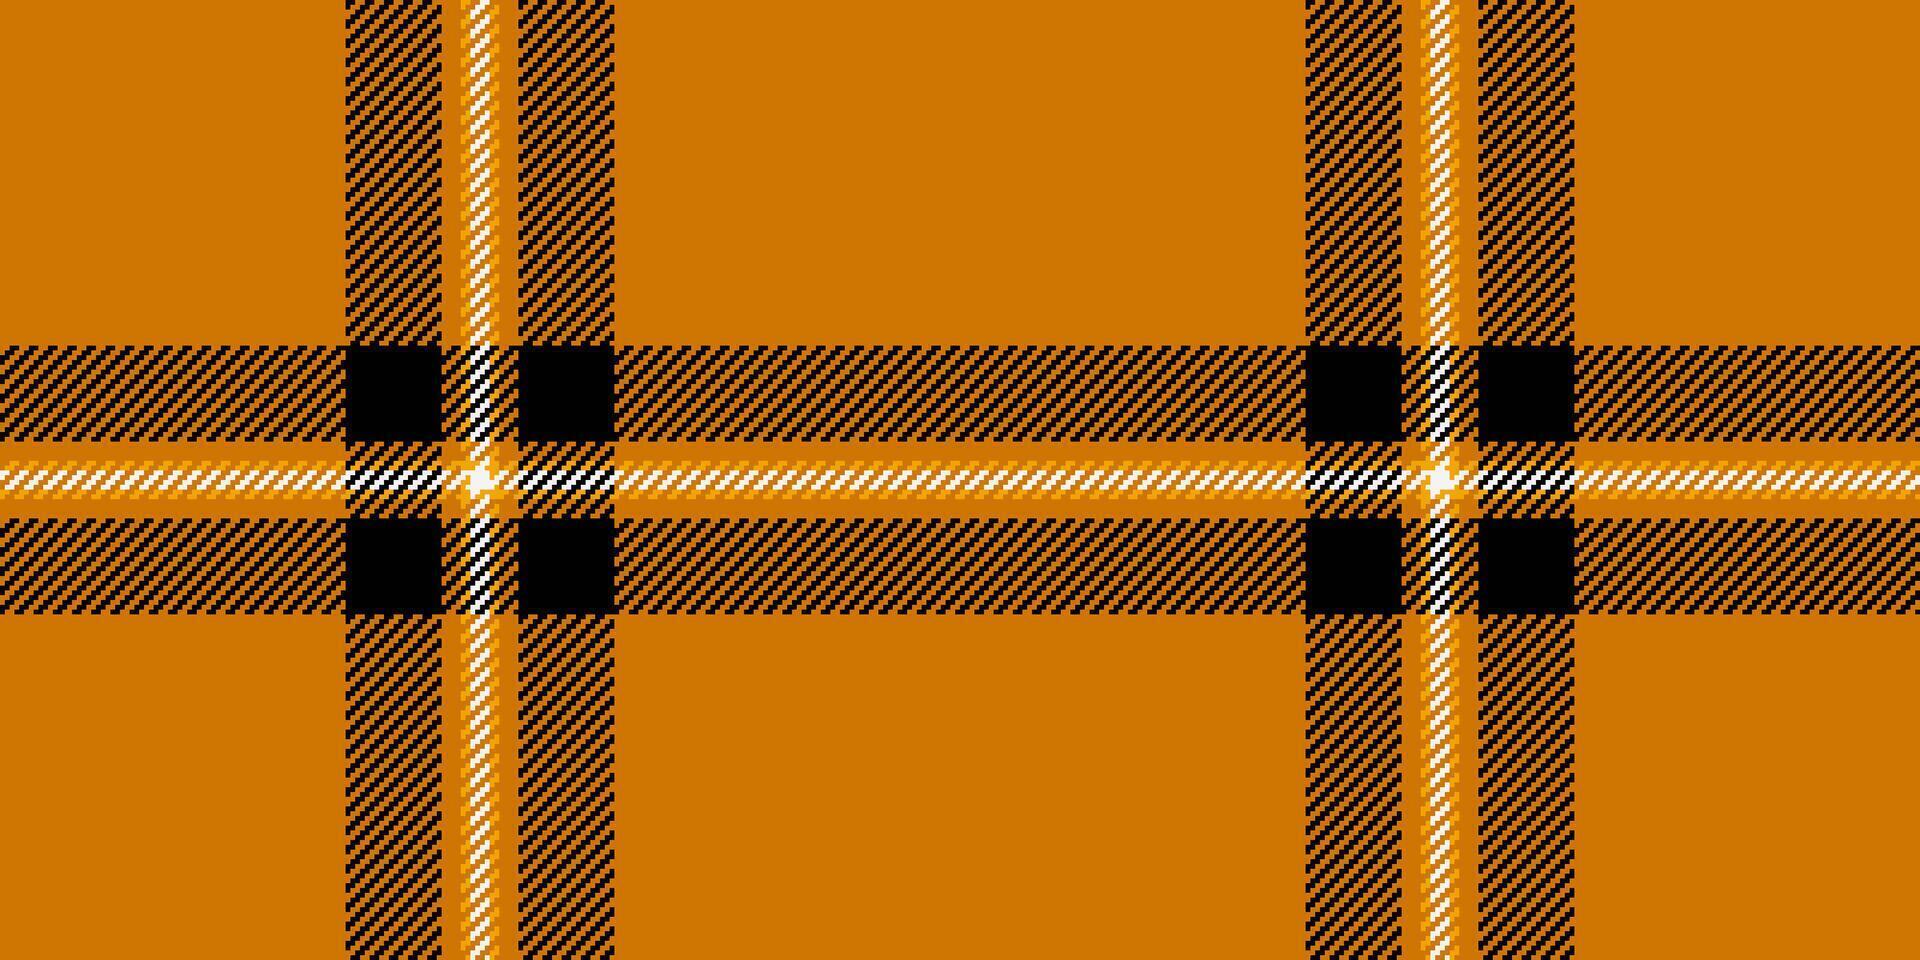 Order texture fabric textile, ornamental vector tartan pattern. Linear background check seamless plaid in orange and black colors.